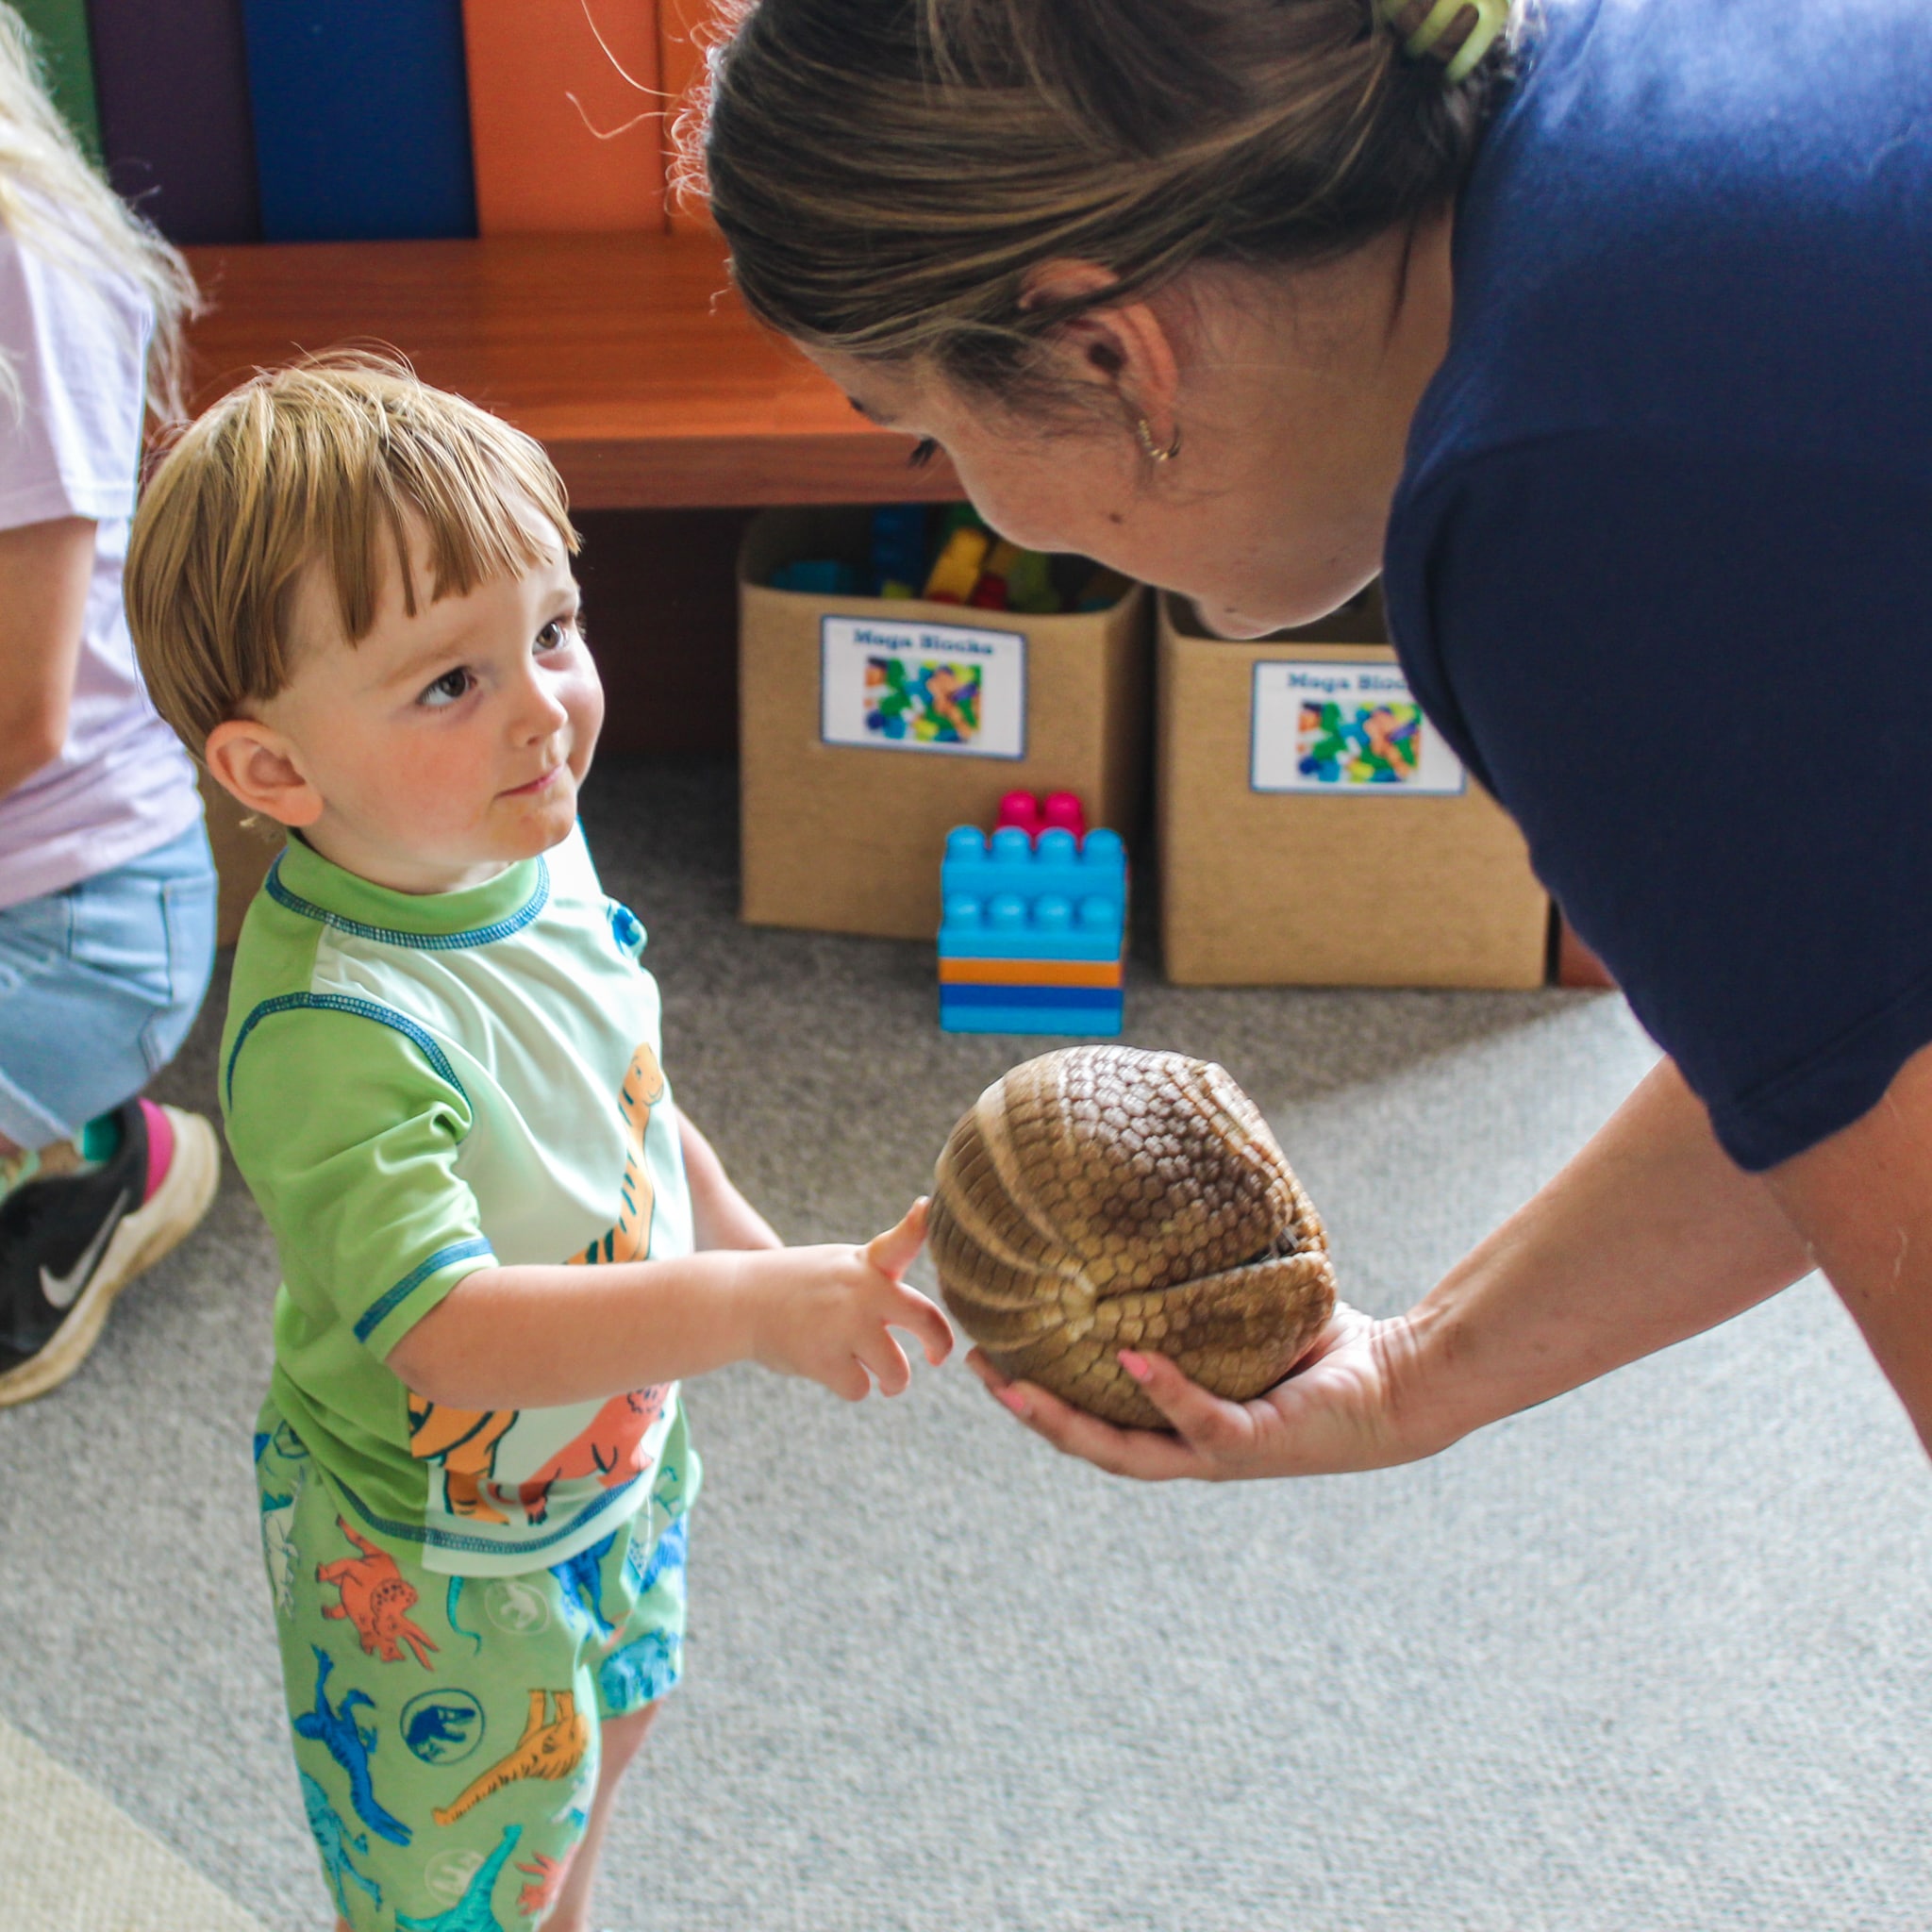 Young boy touching an armadillo held by a woman in a navy shirt.